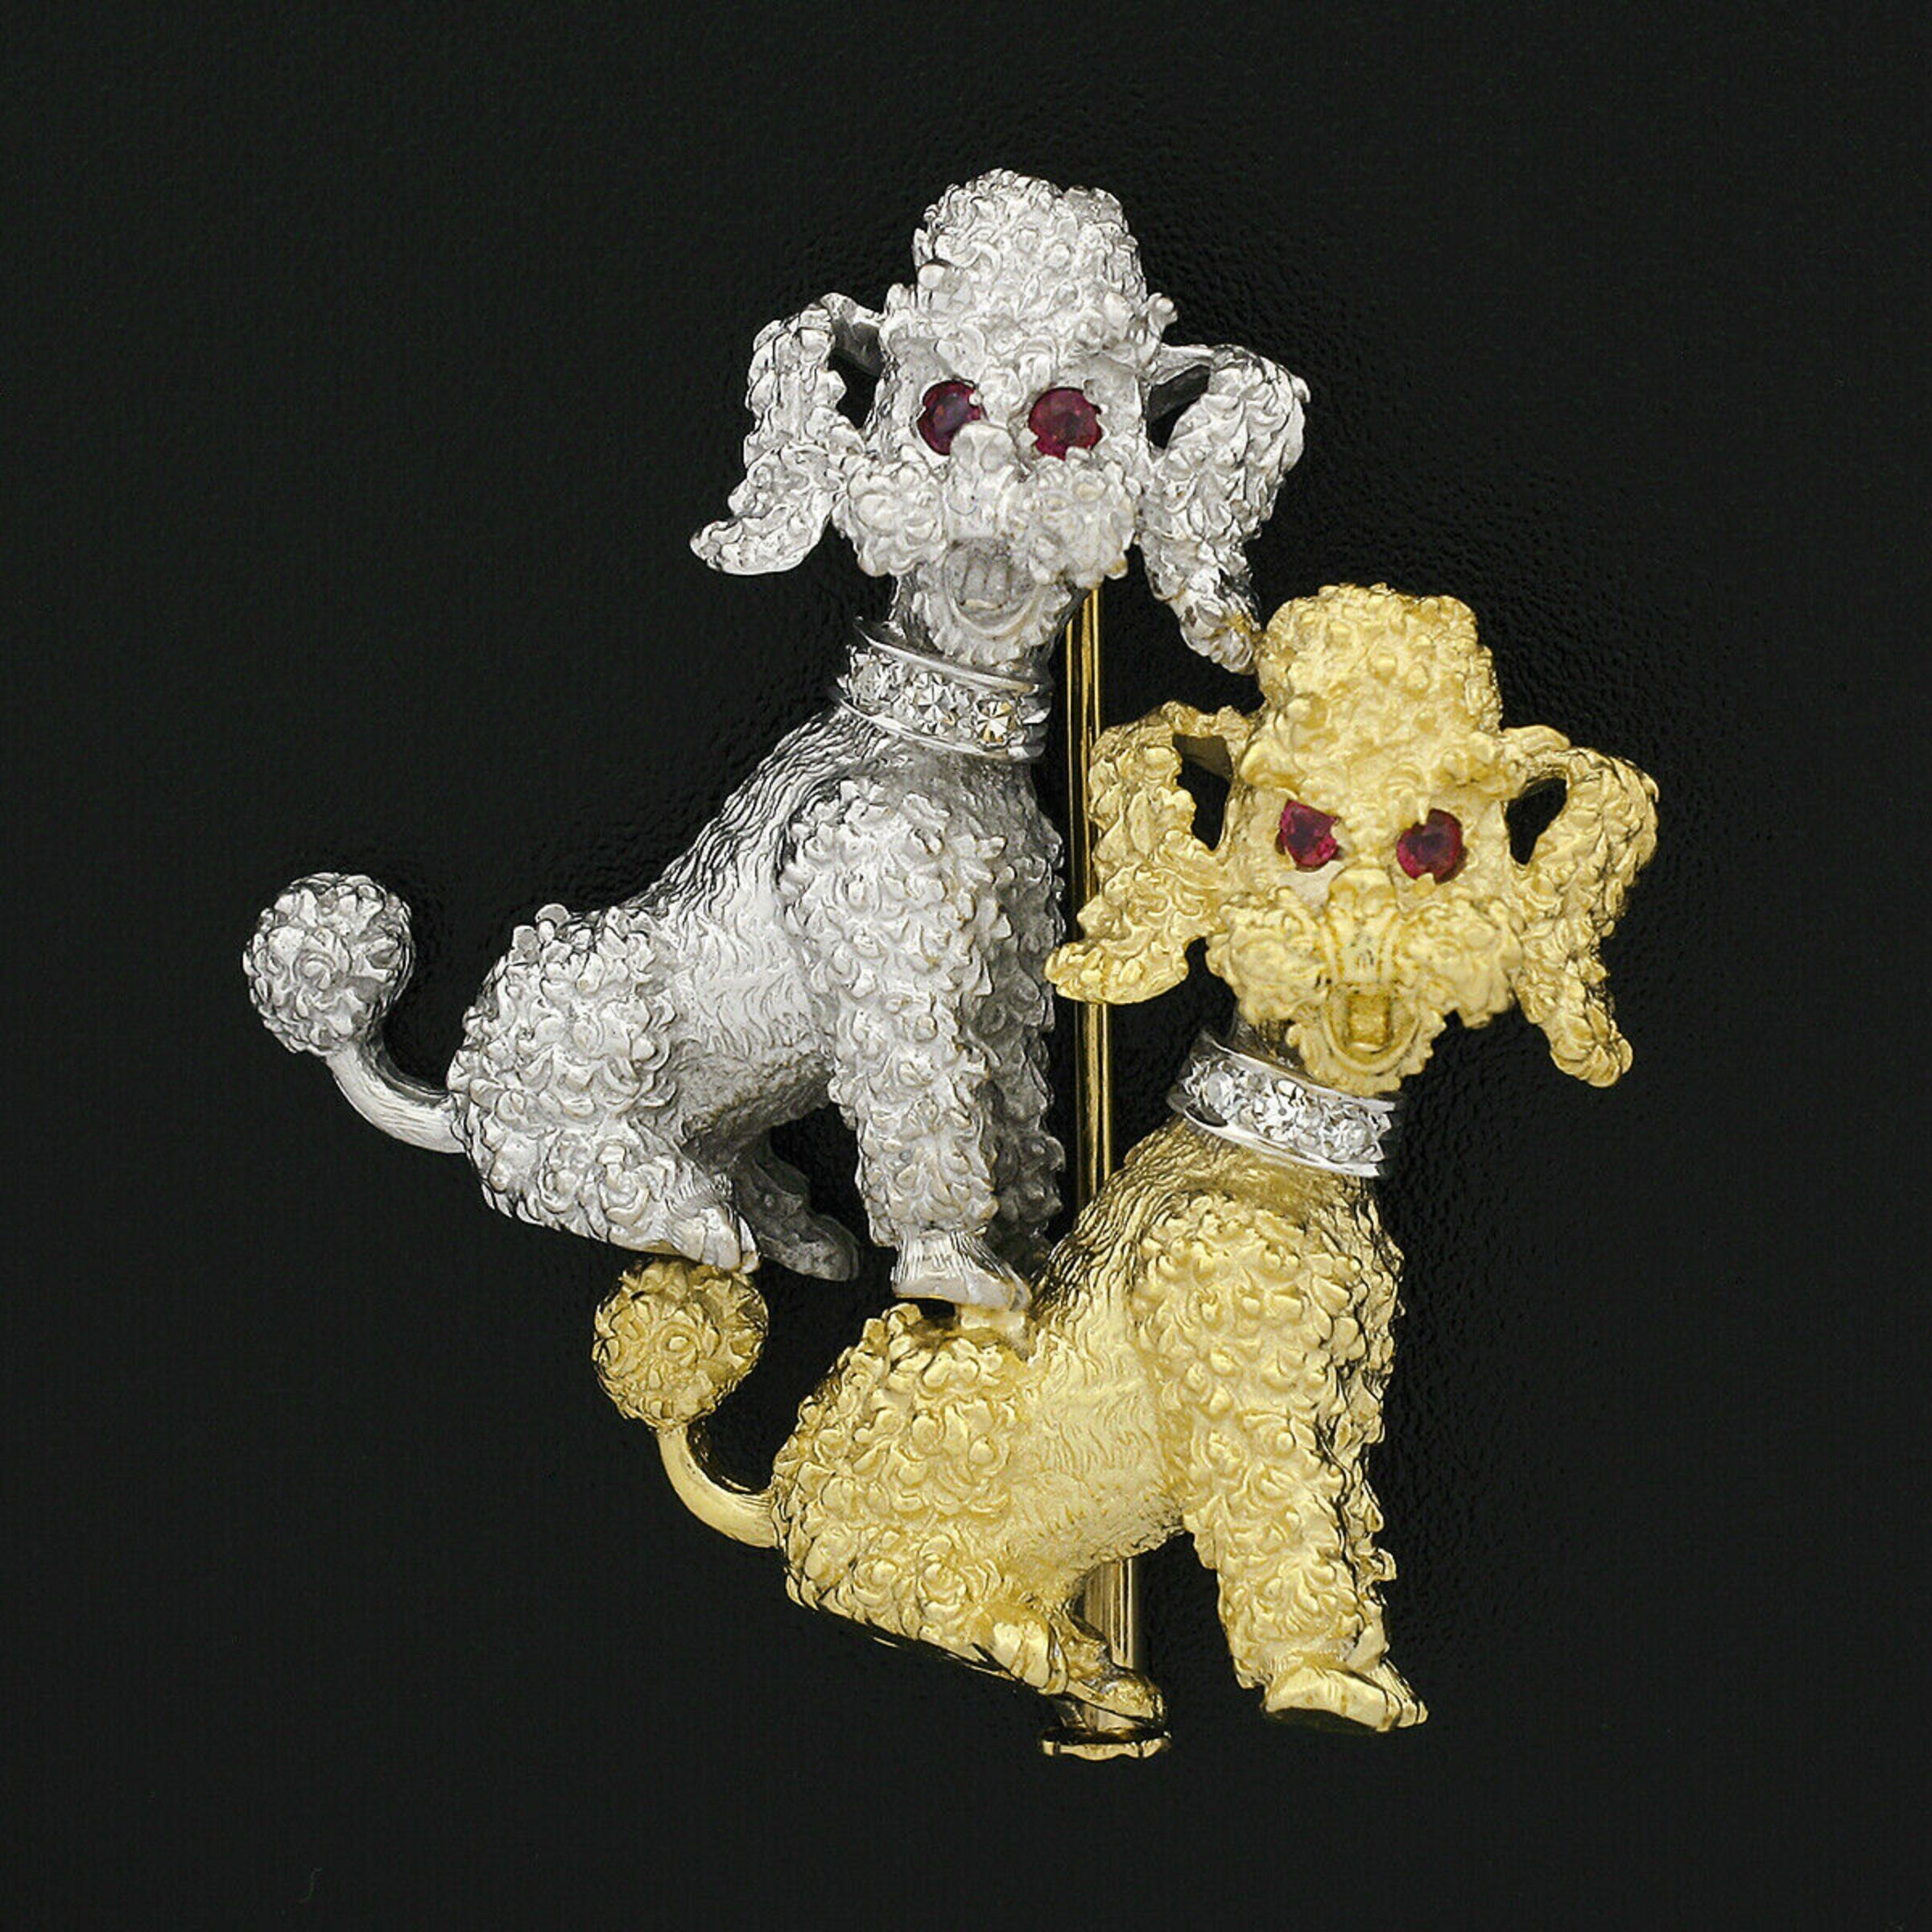 This outstanding vintage pin/brooch is crafted in solid 18k white and yellow gold and features two extremely detailed and textured poodle dogs. The adorable poodles are neatly set with fine rubies at their eyes, as well as gorgeous diamonds that